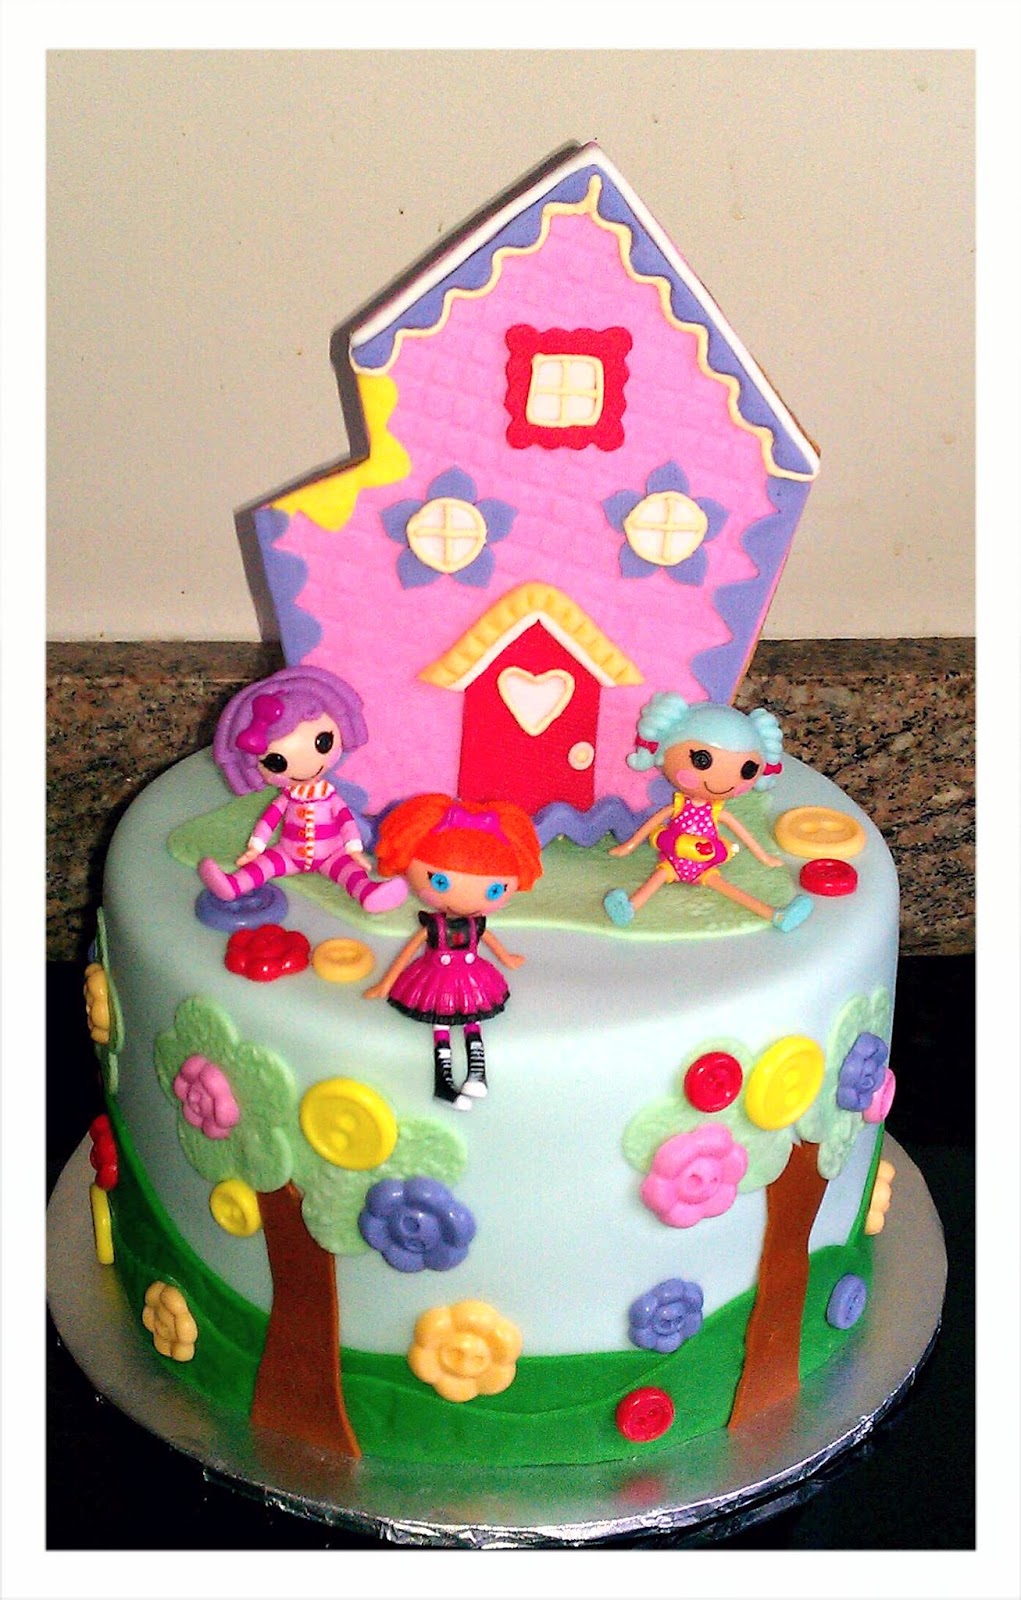 Cakes By Diana in Charlotte NC,: Lalaloopsy cake